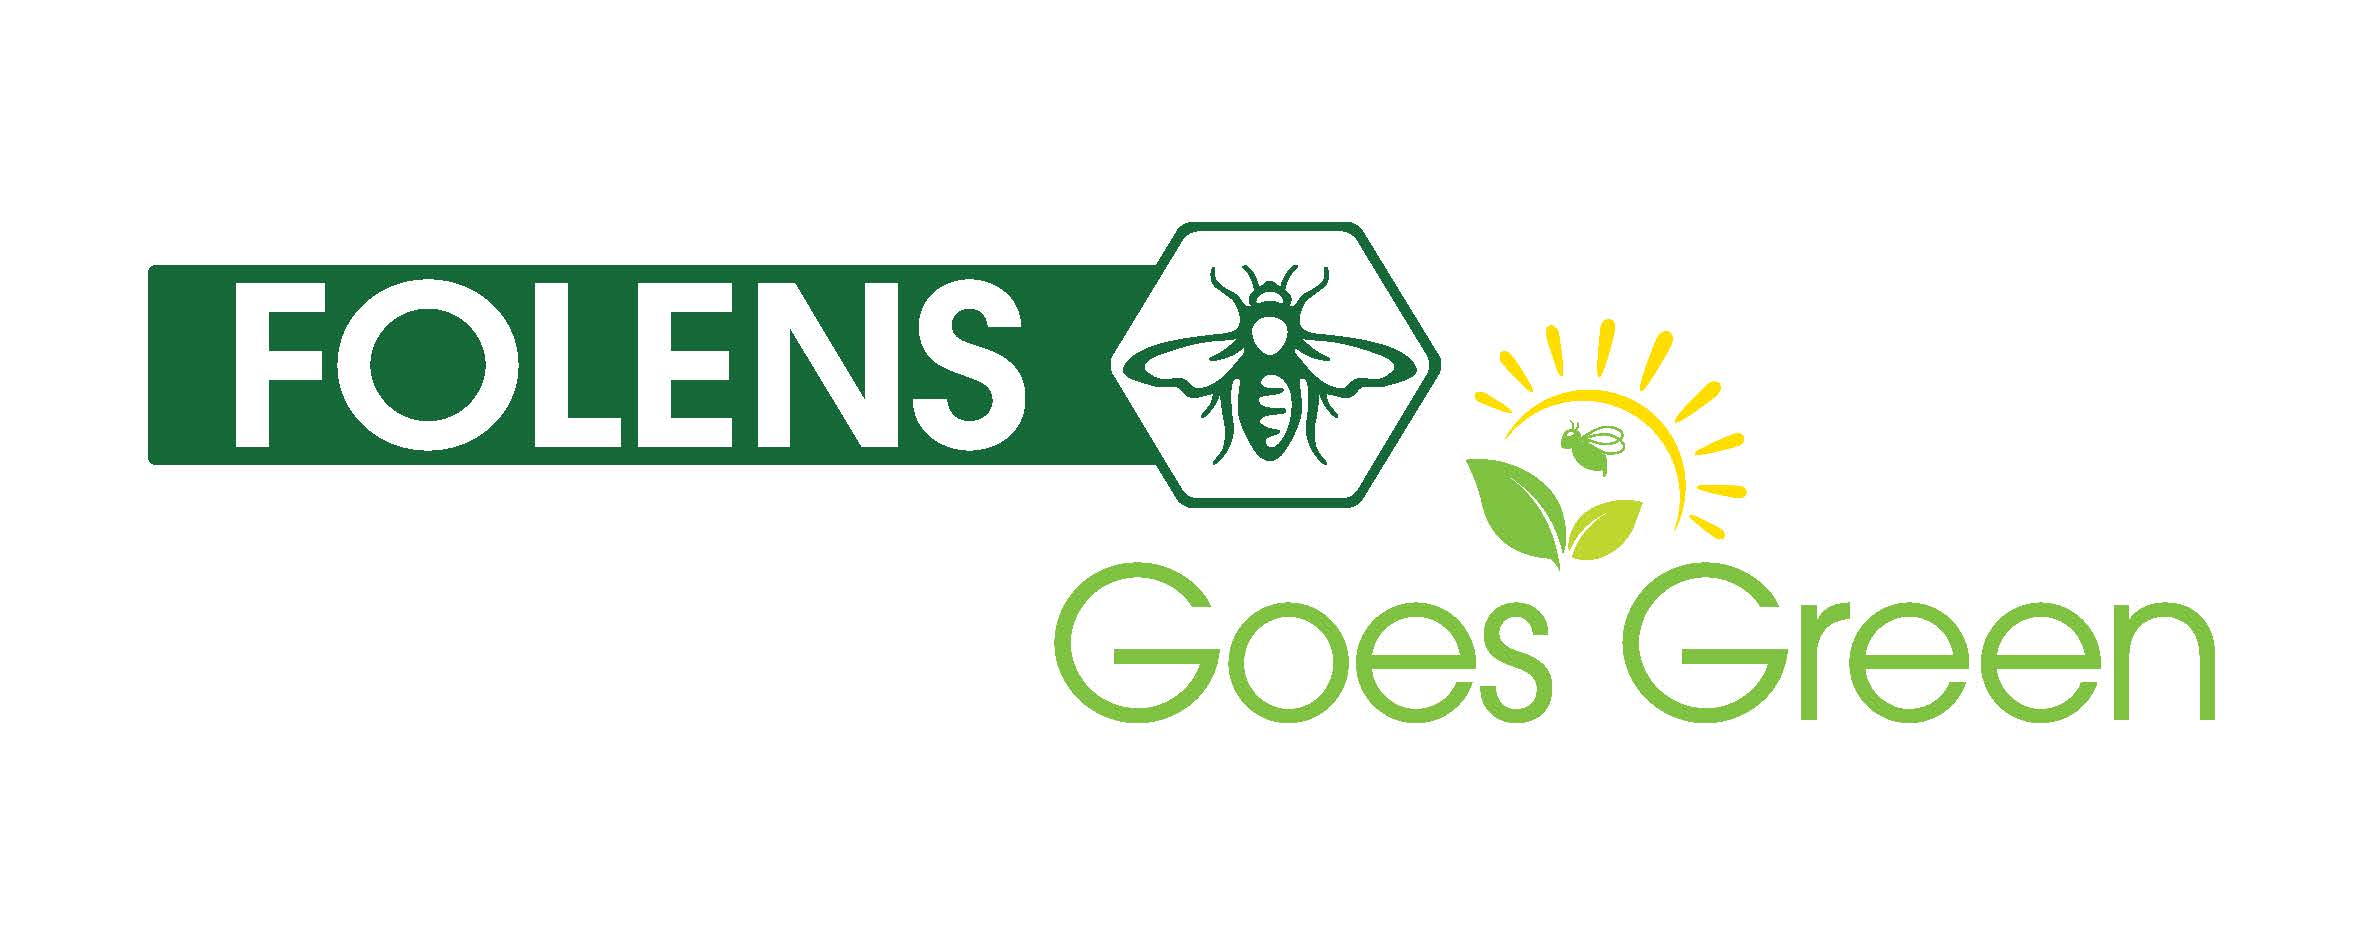 Learn more about Folens Goes Green - Leads to external website